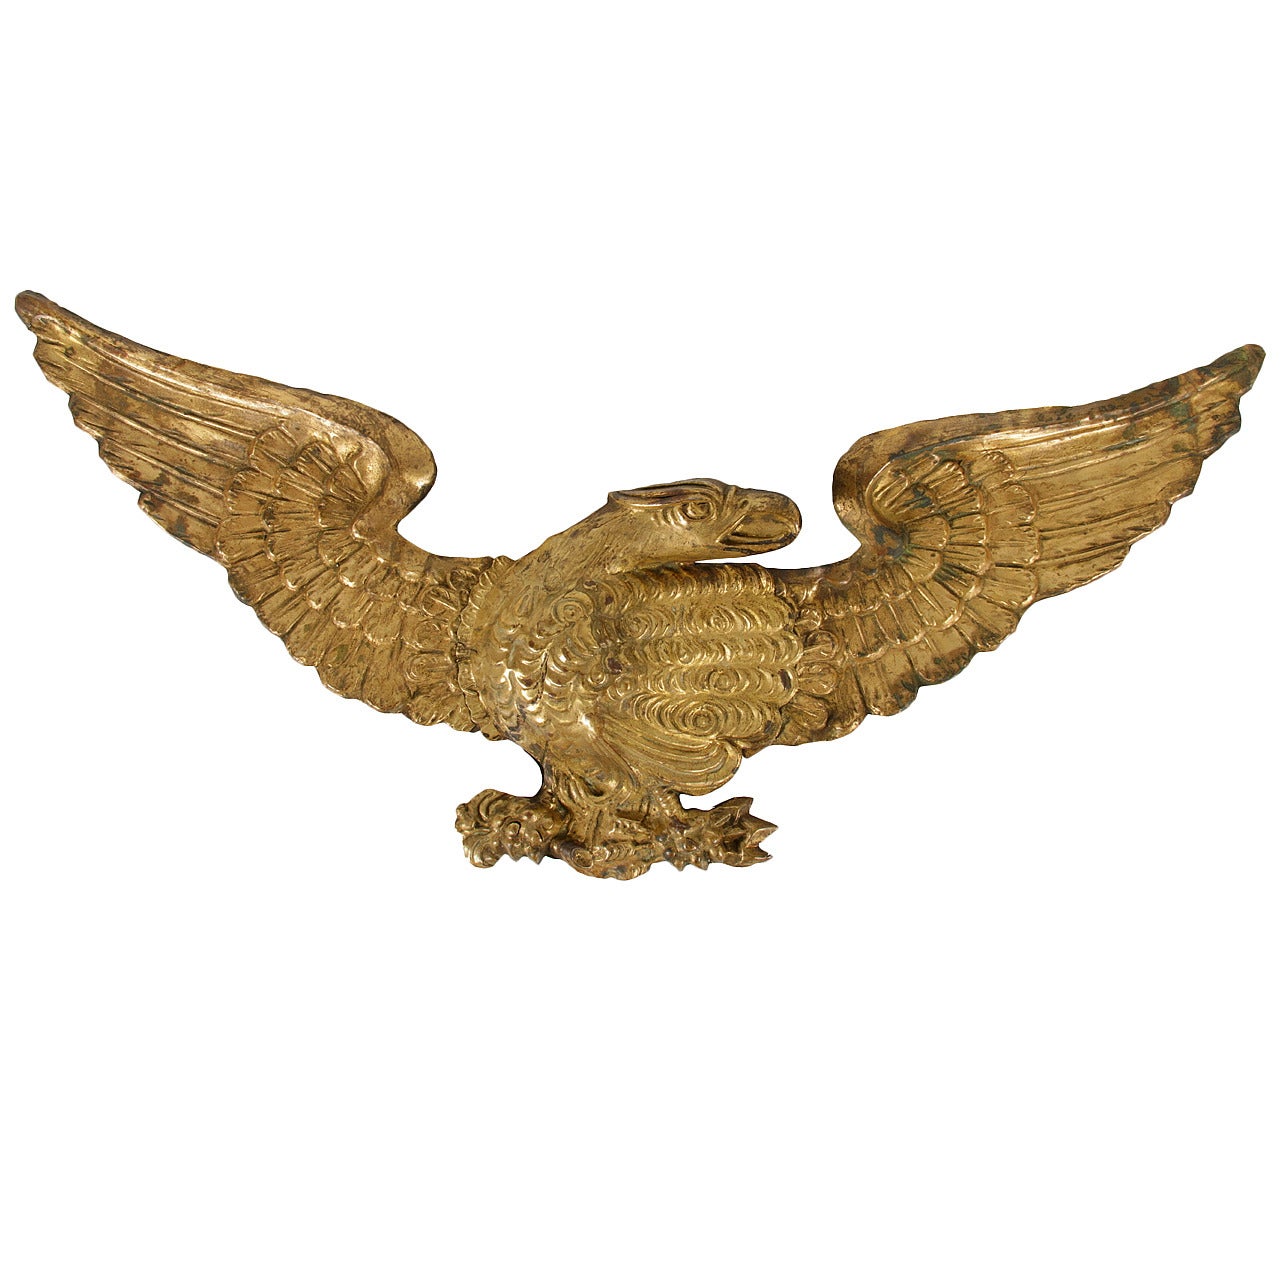 Pressed Brass Eagle, an Early Parade Flag Holder and Bunting Tie Back